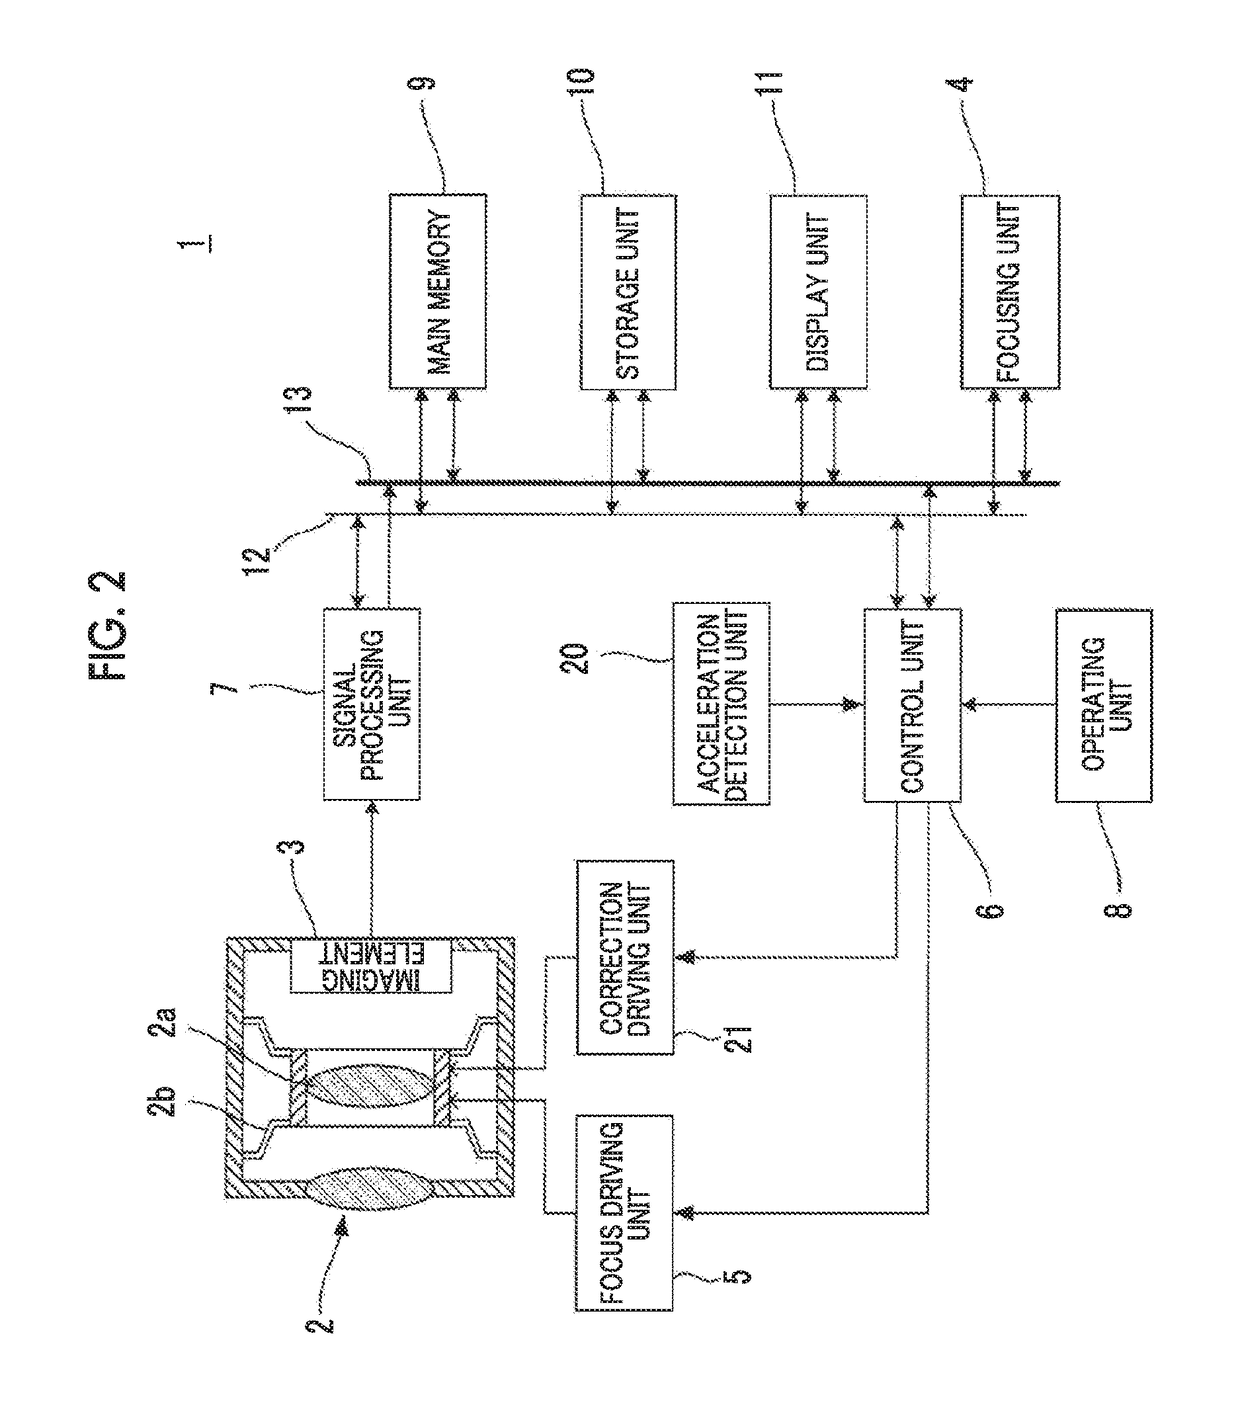 Imaging apparatus and image blur correction method